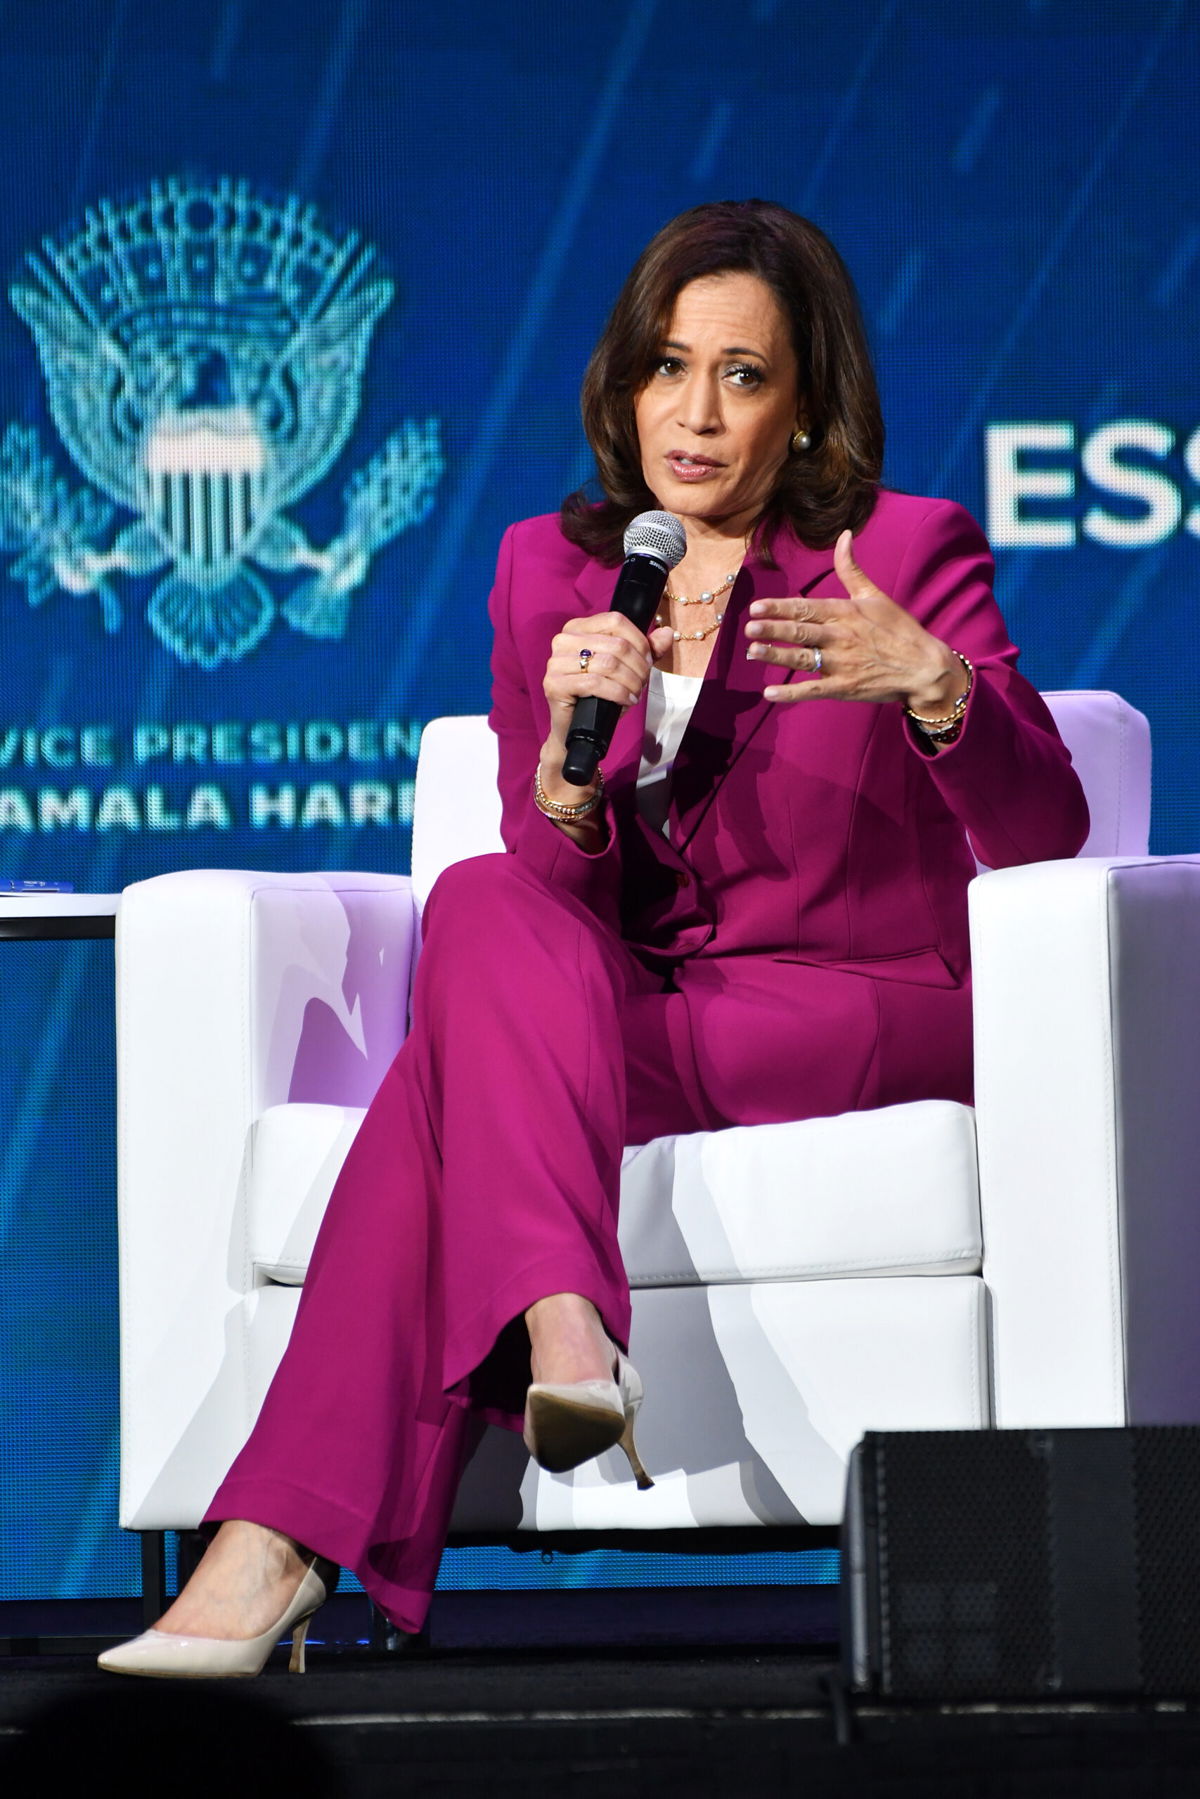 <i>Paras Griffin/Getty Images</i><br/>Vice President Kamala Harris speaks during the 2022 Essence Festival of Culture at the Ernest N. Morial Convention Center on July 2